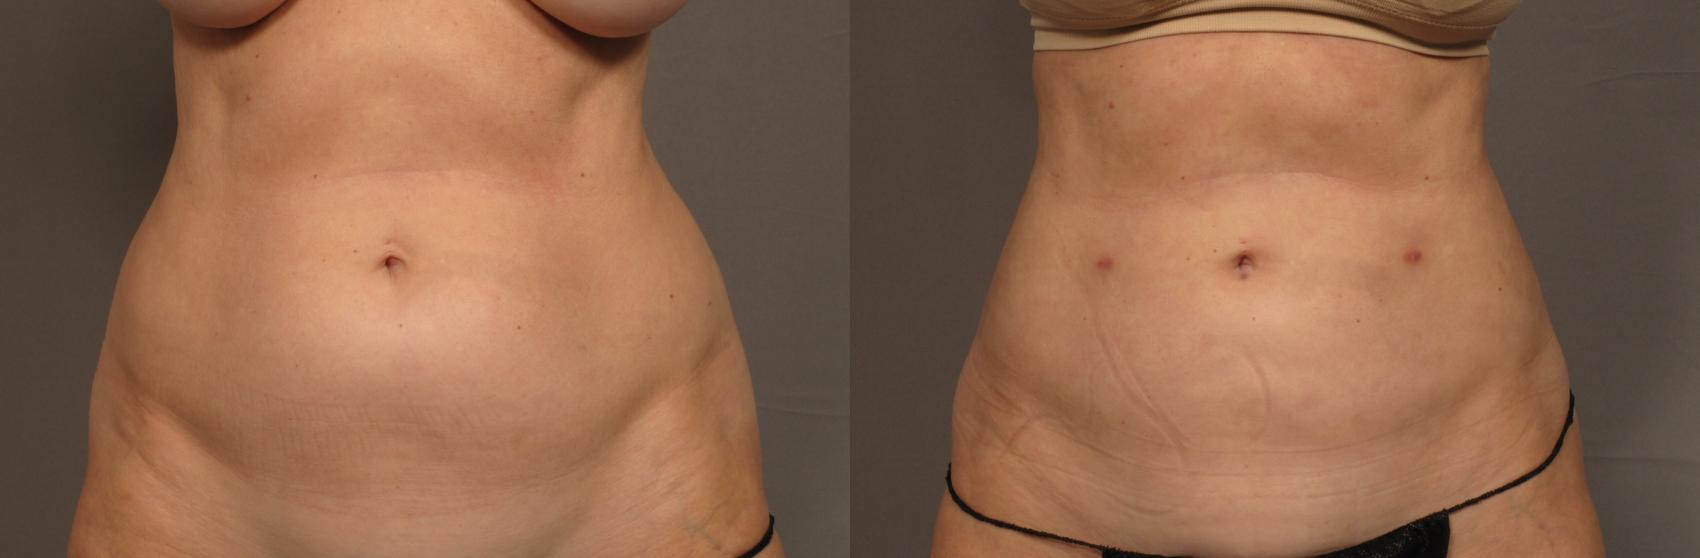 Frontal View of 59 year old Woman Before Renuvion and Liposuction to the Tummy